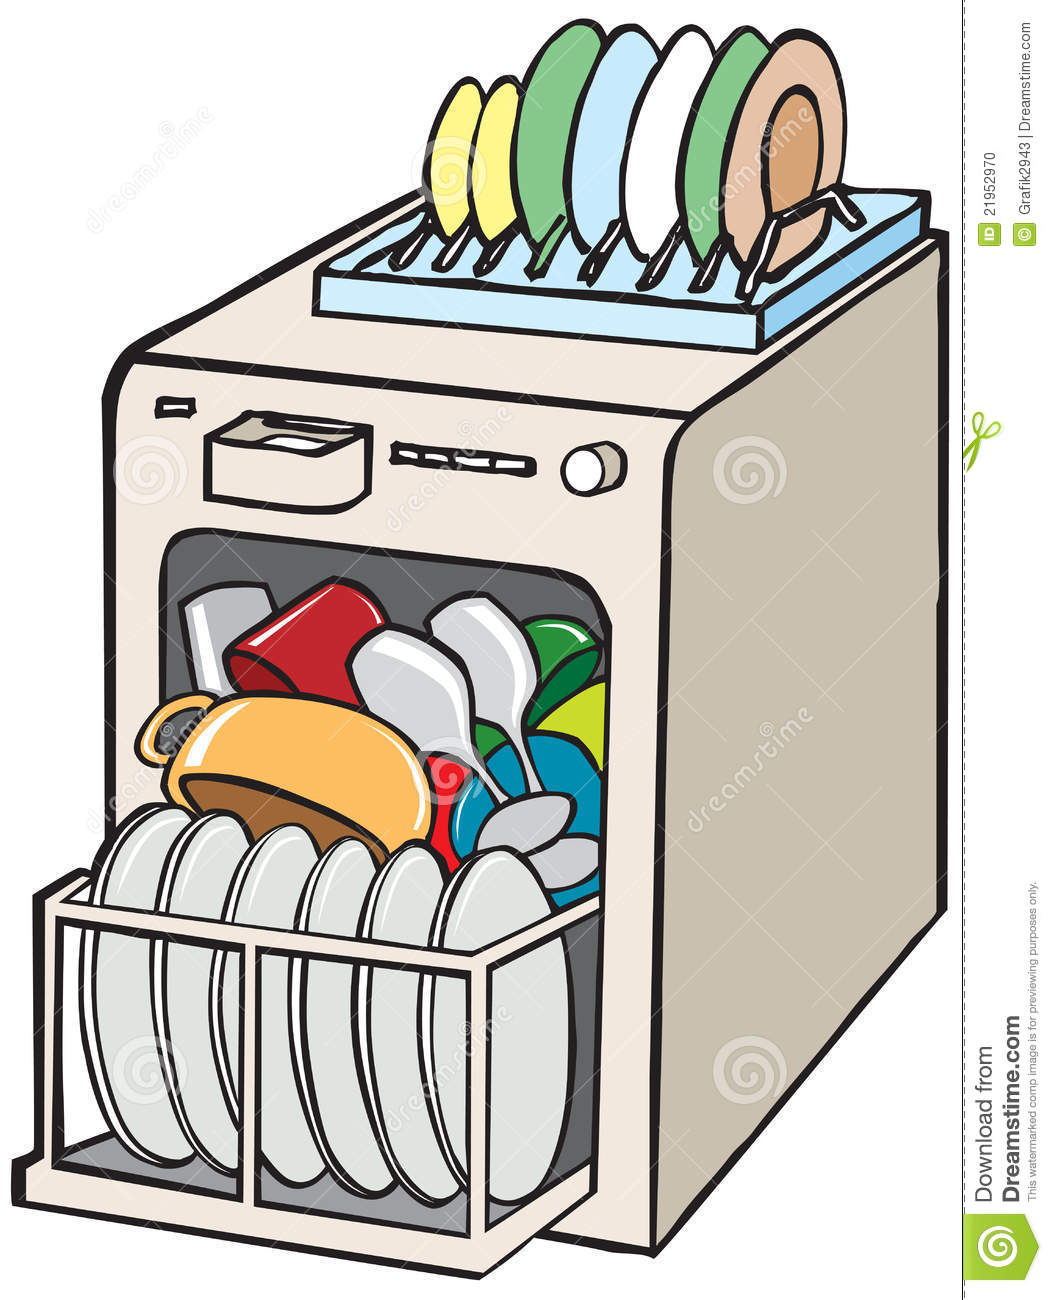 Dishwasher 20clipart   Clipart Panda   Free Clipart Images